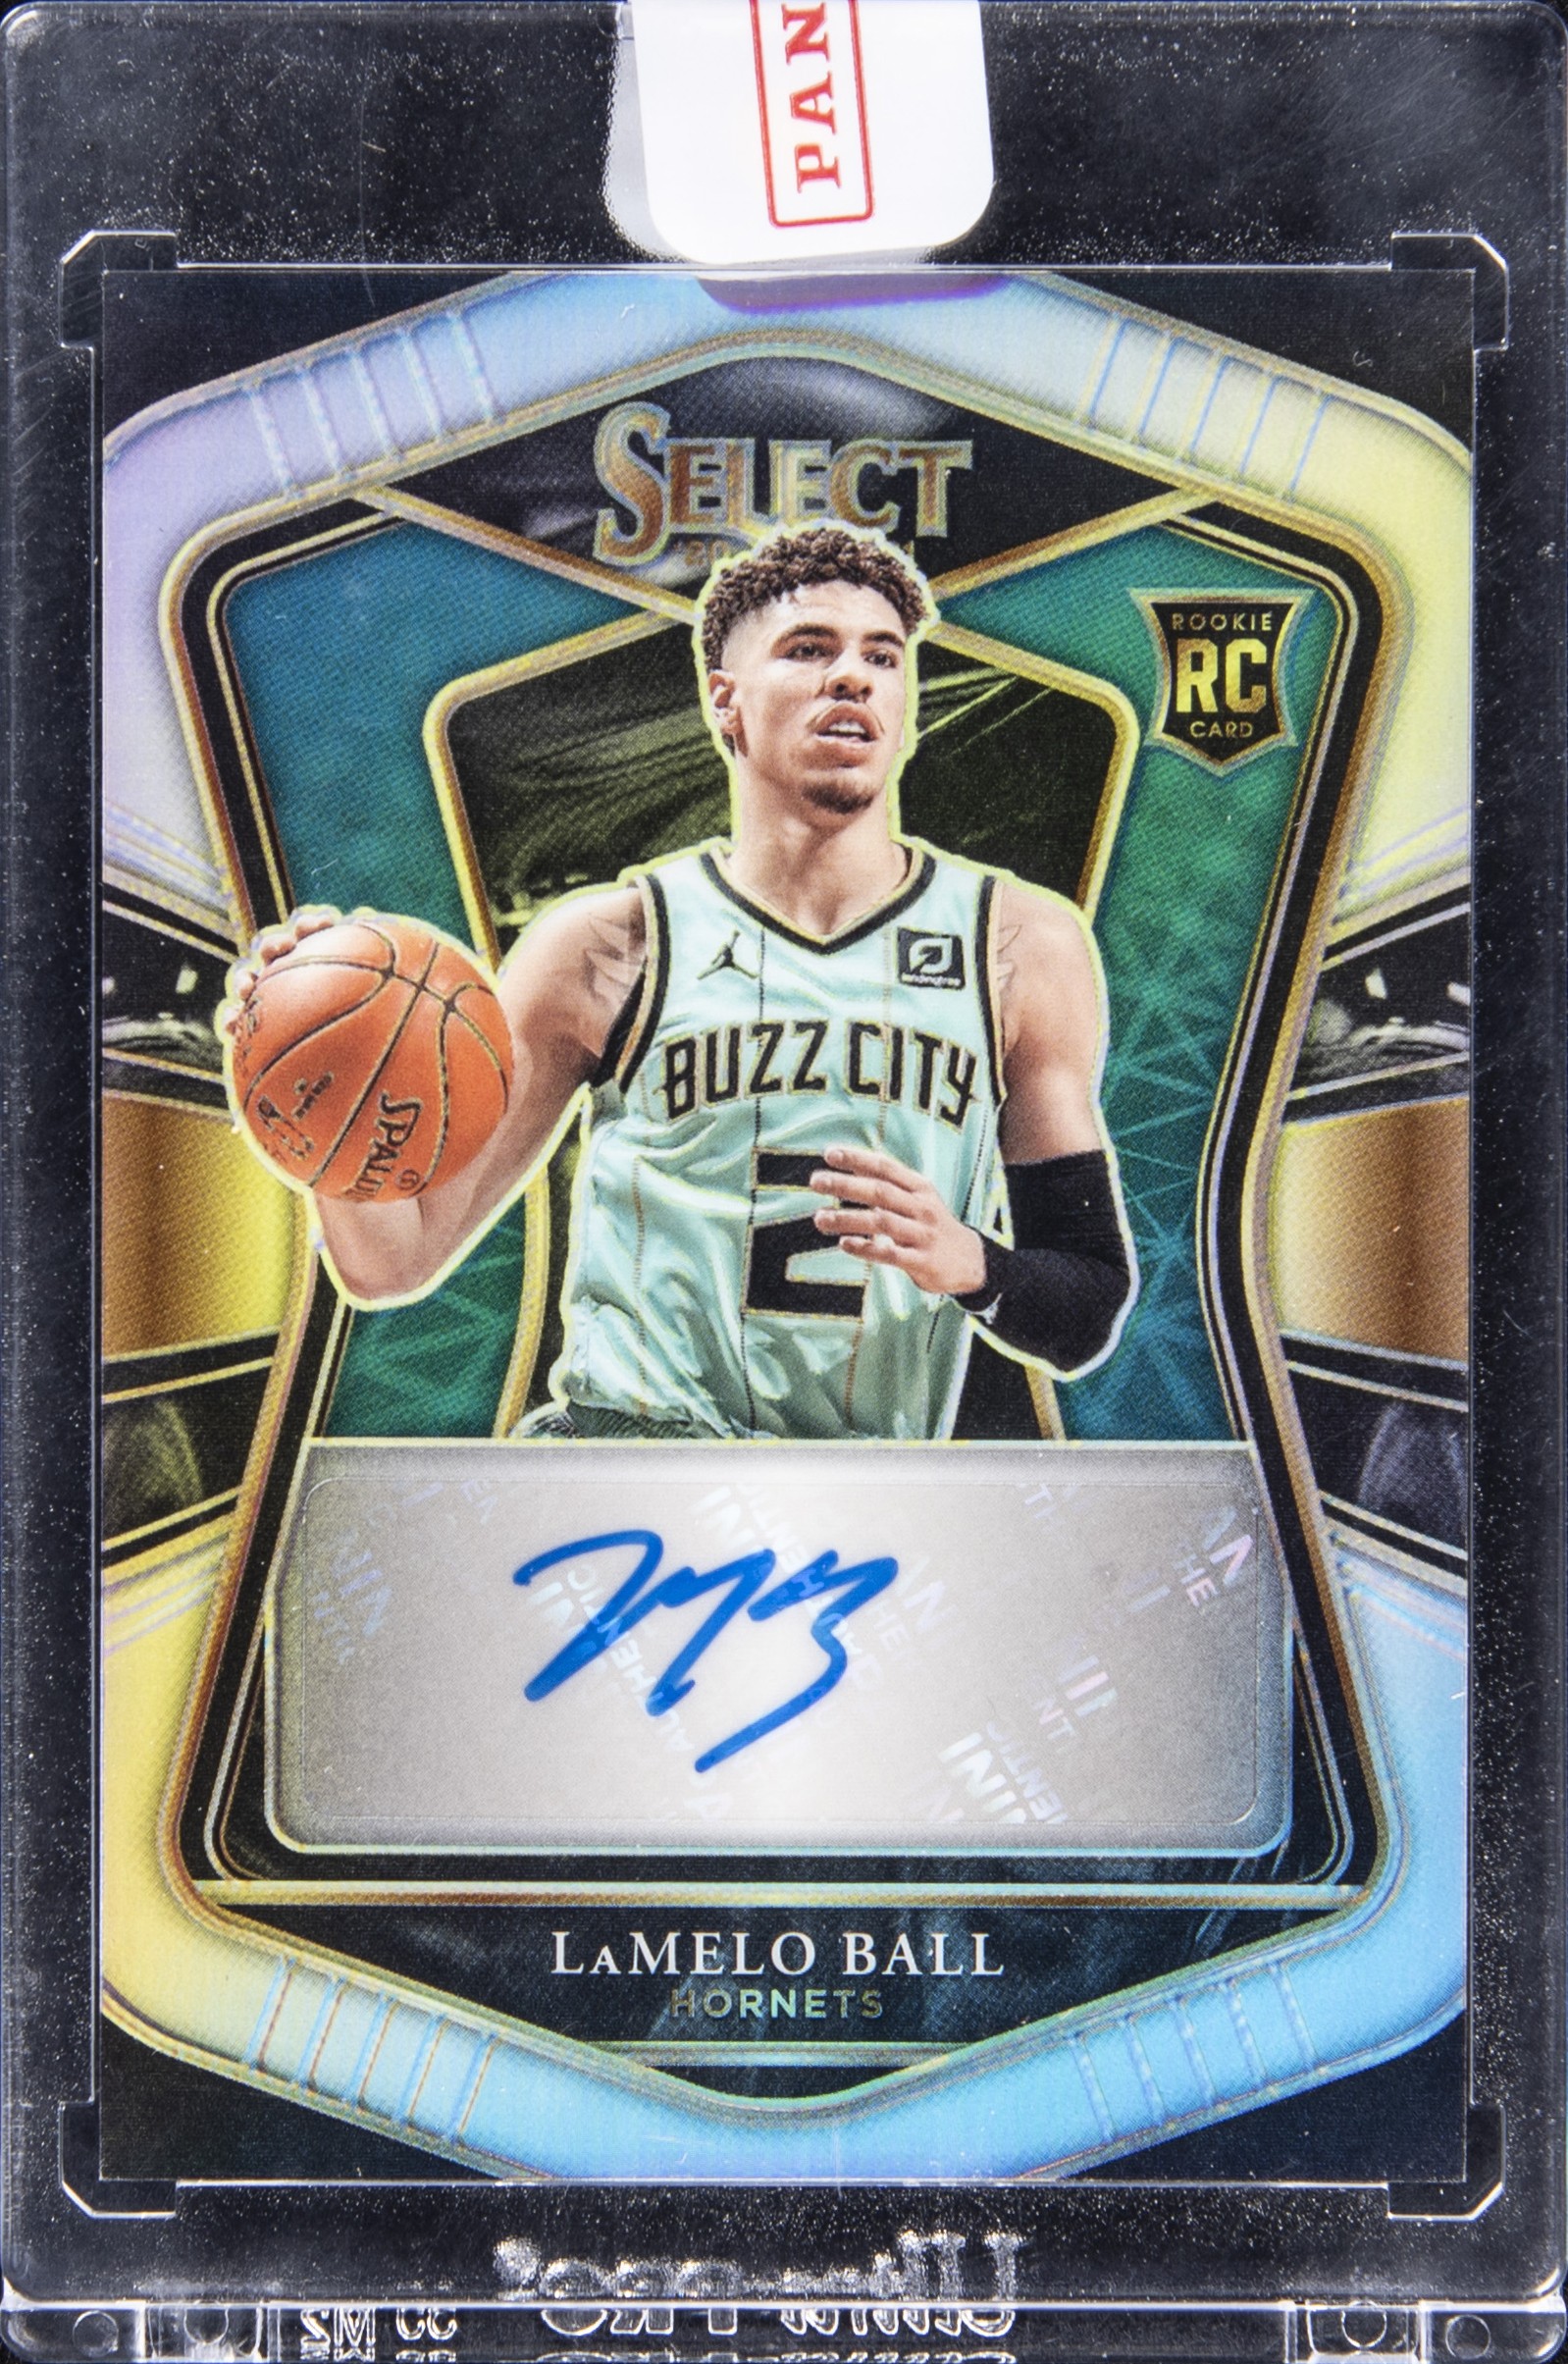 2020-21 Panini Select Rookie Signatures #Rs-Bal Lamelo Ball Signed Rookie Card (#194/249) - Panini Encased